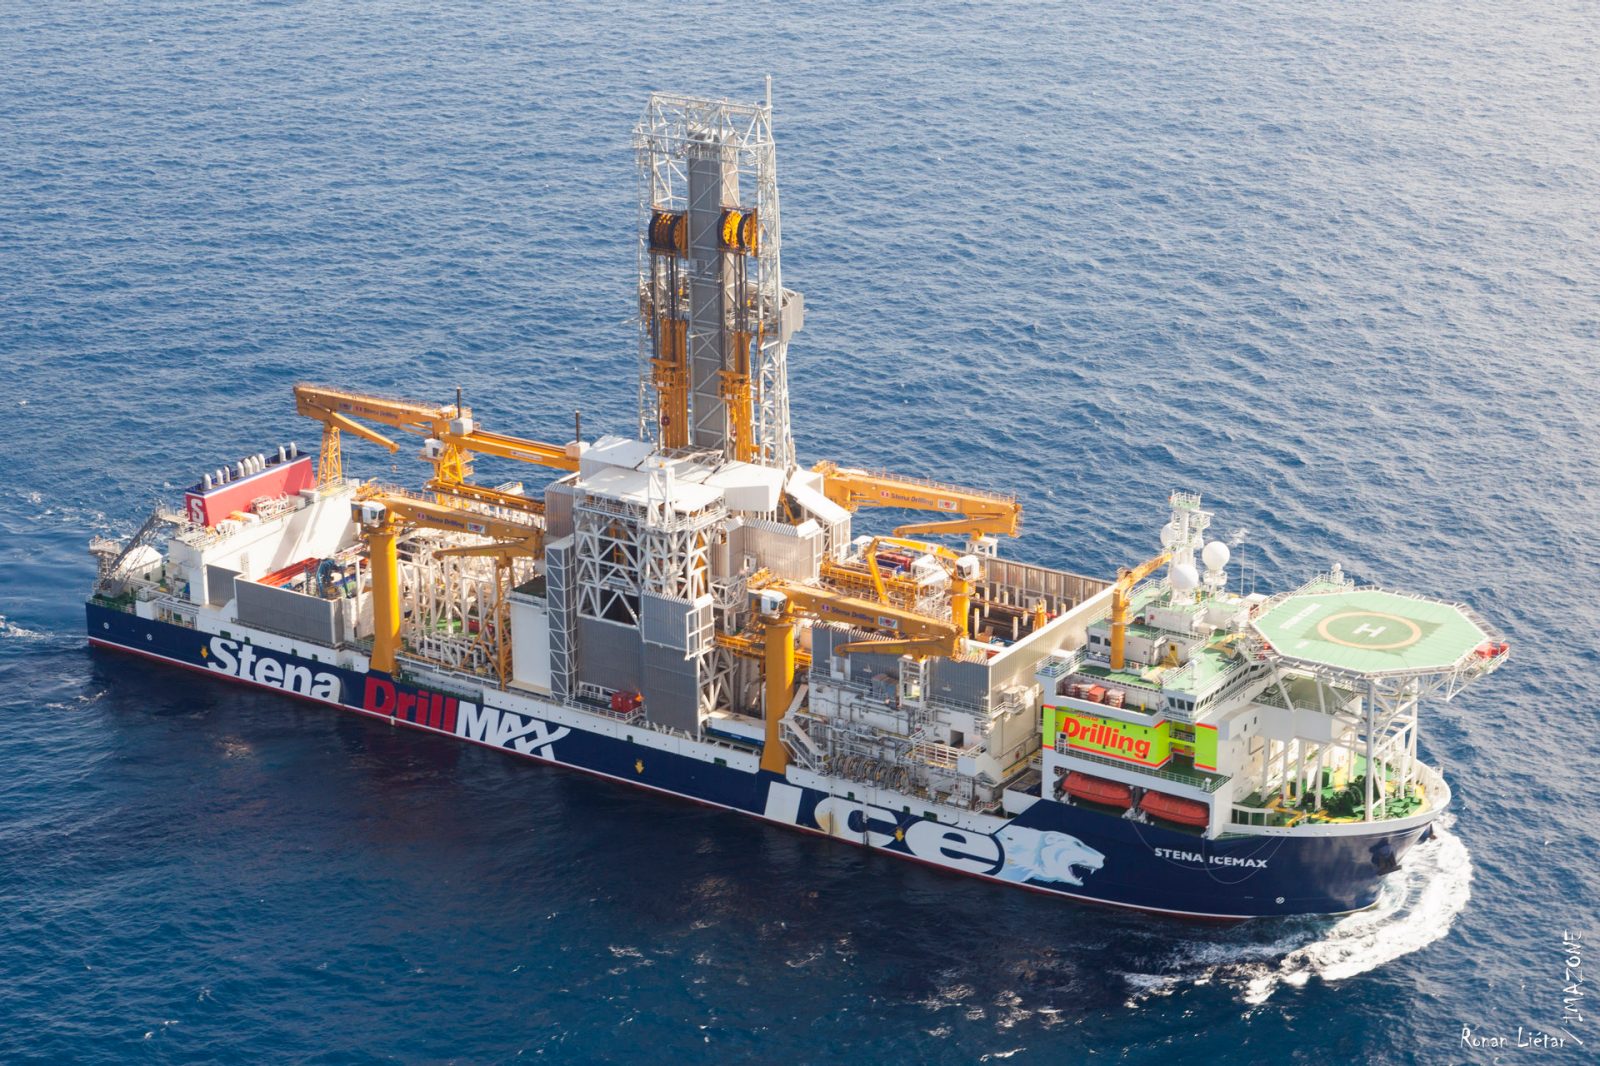 Aerial view of a drillship with helipad